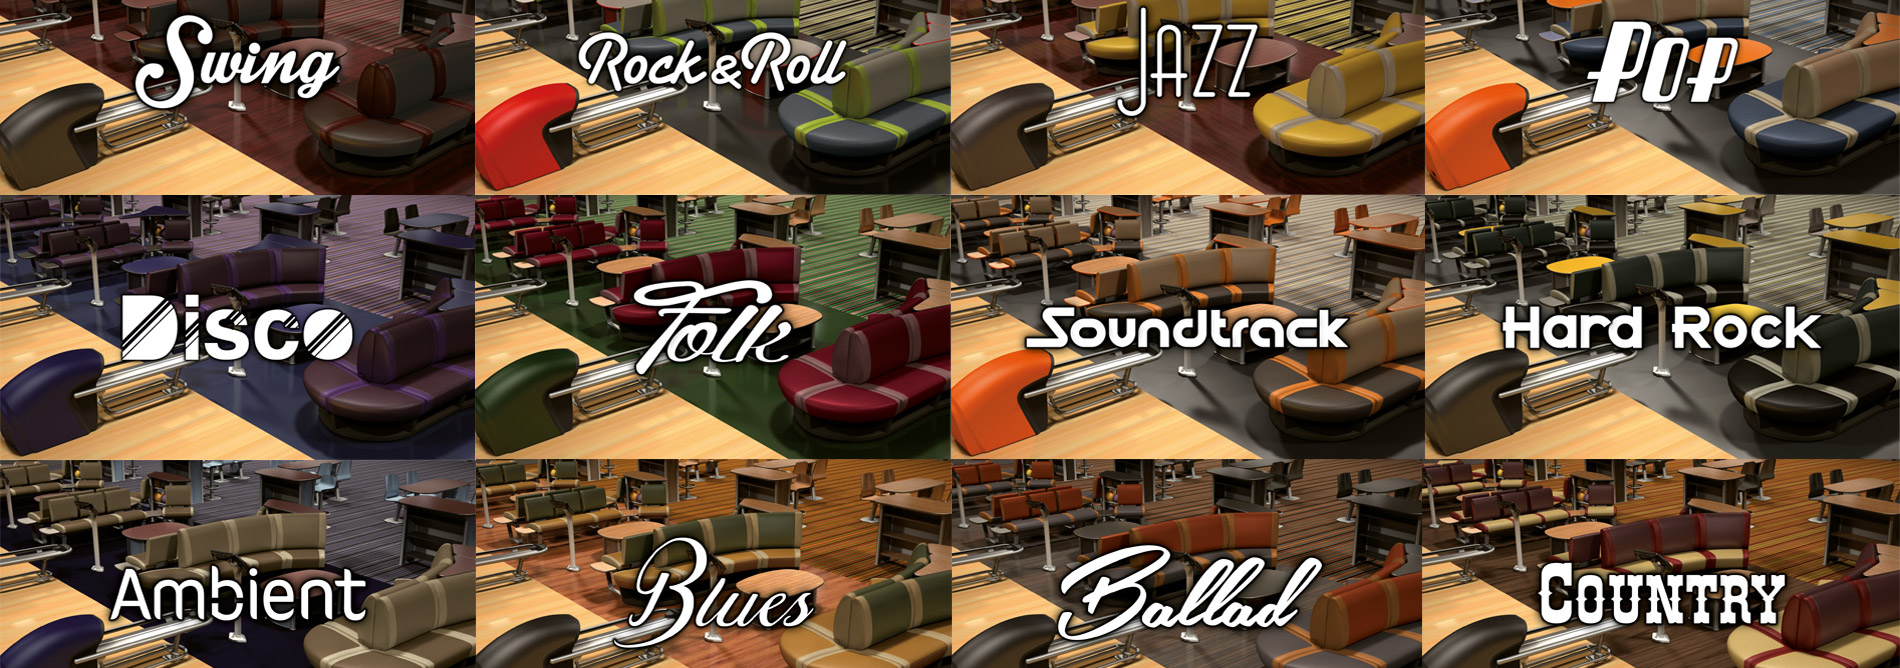 Bowling-QubicaAMF-furniture-harmony-color-combination-banner12.jpg